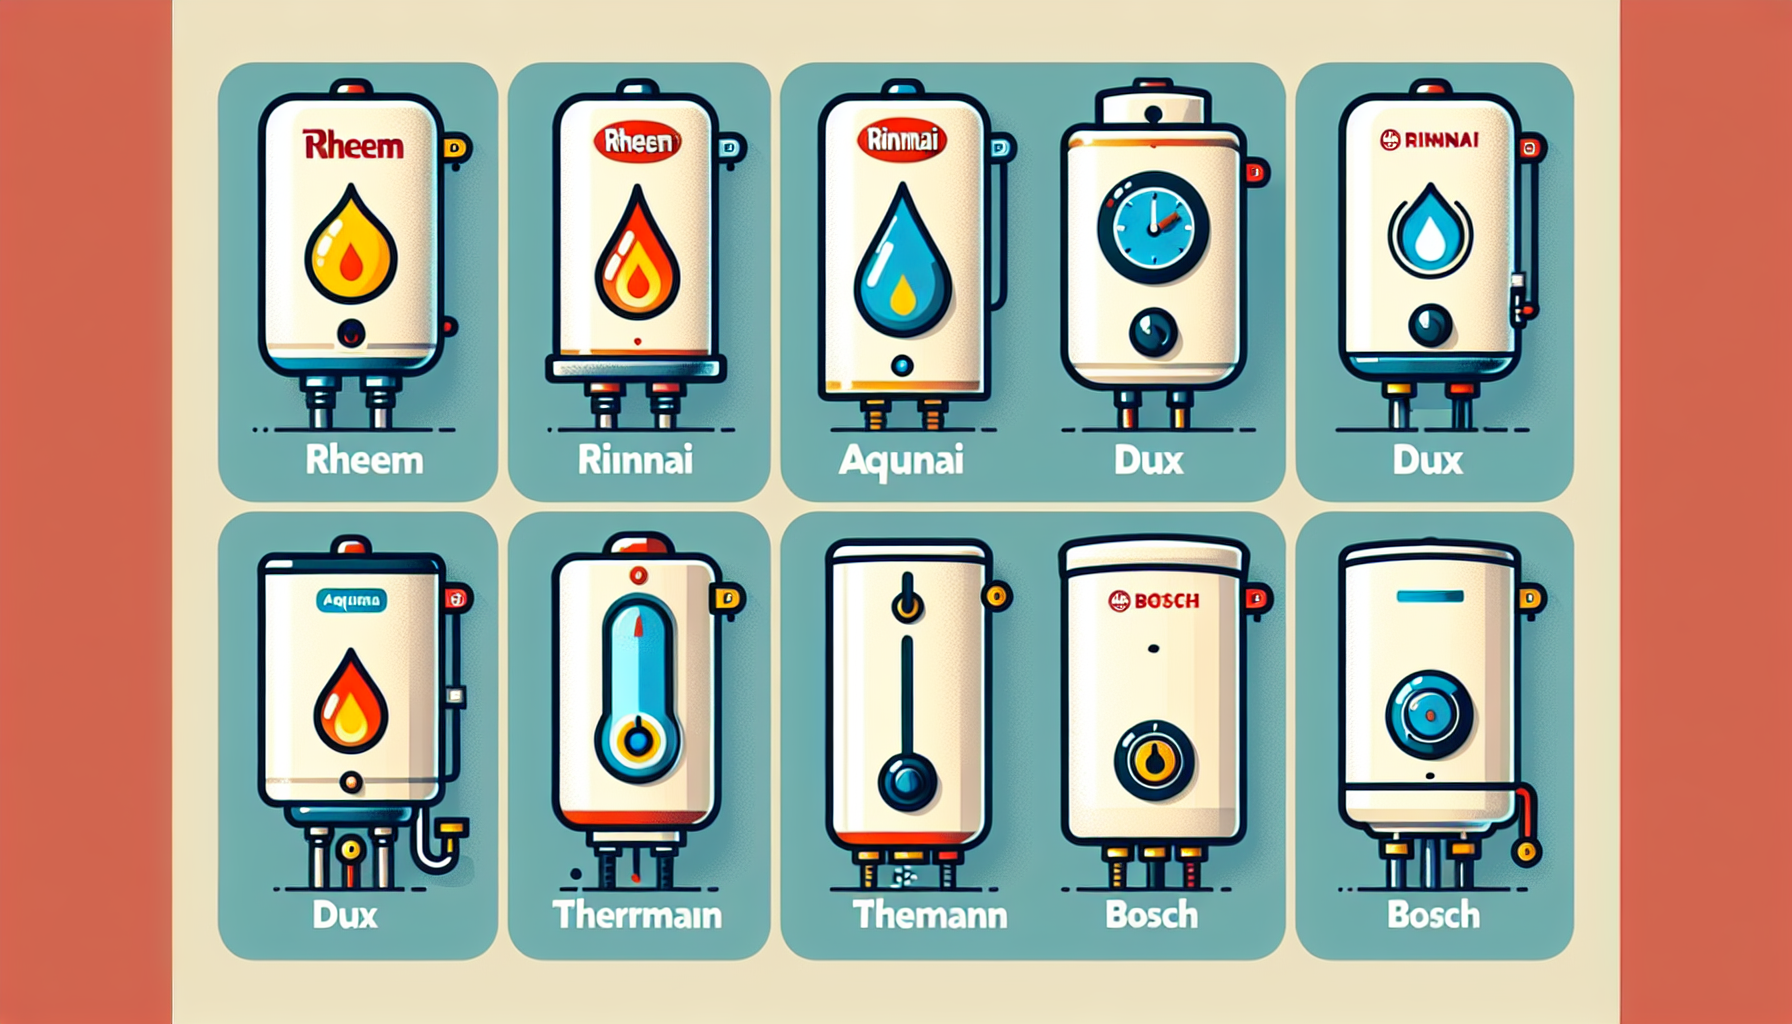 Comparison of hot water system brands including Rheem, Rinnai, Aquamax, Dux, Thermann, and Bosch